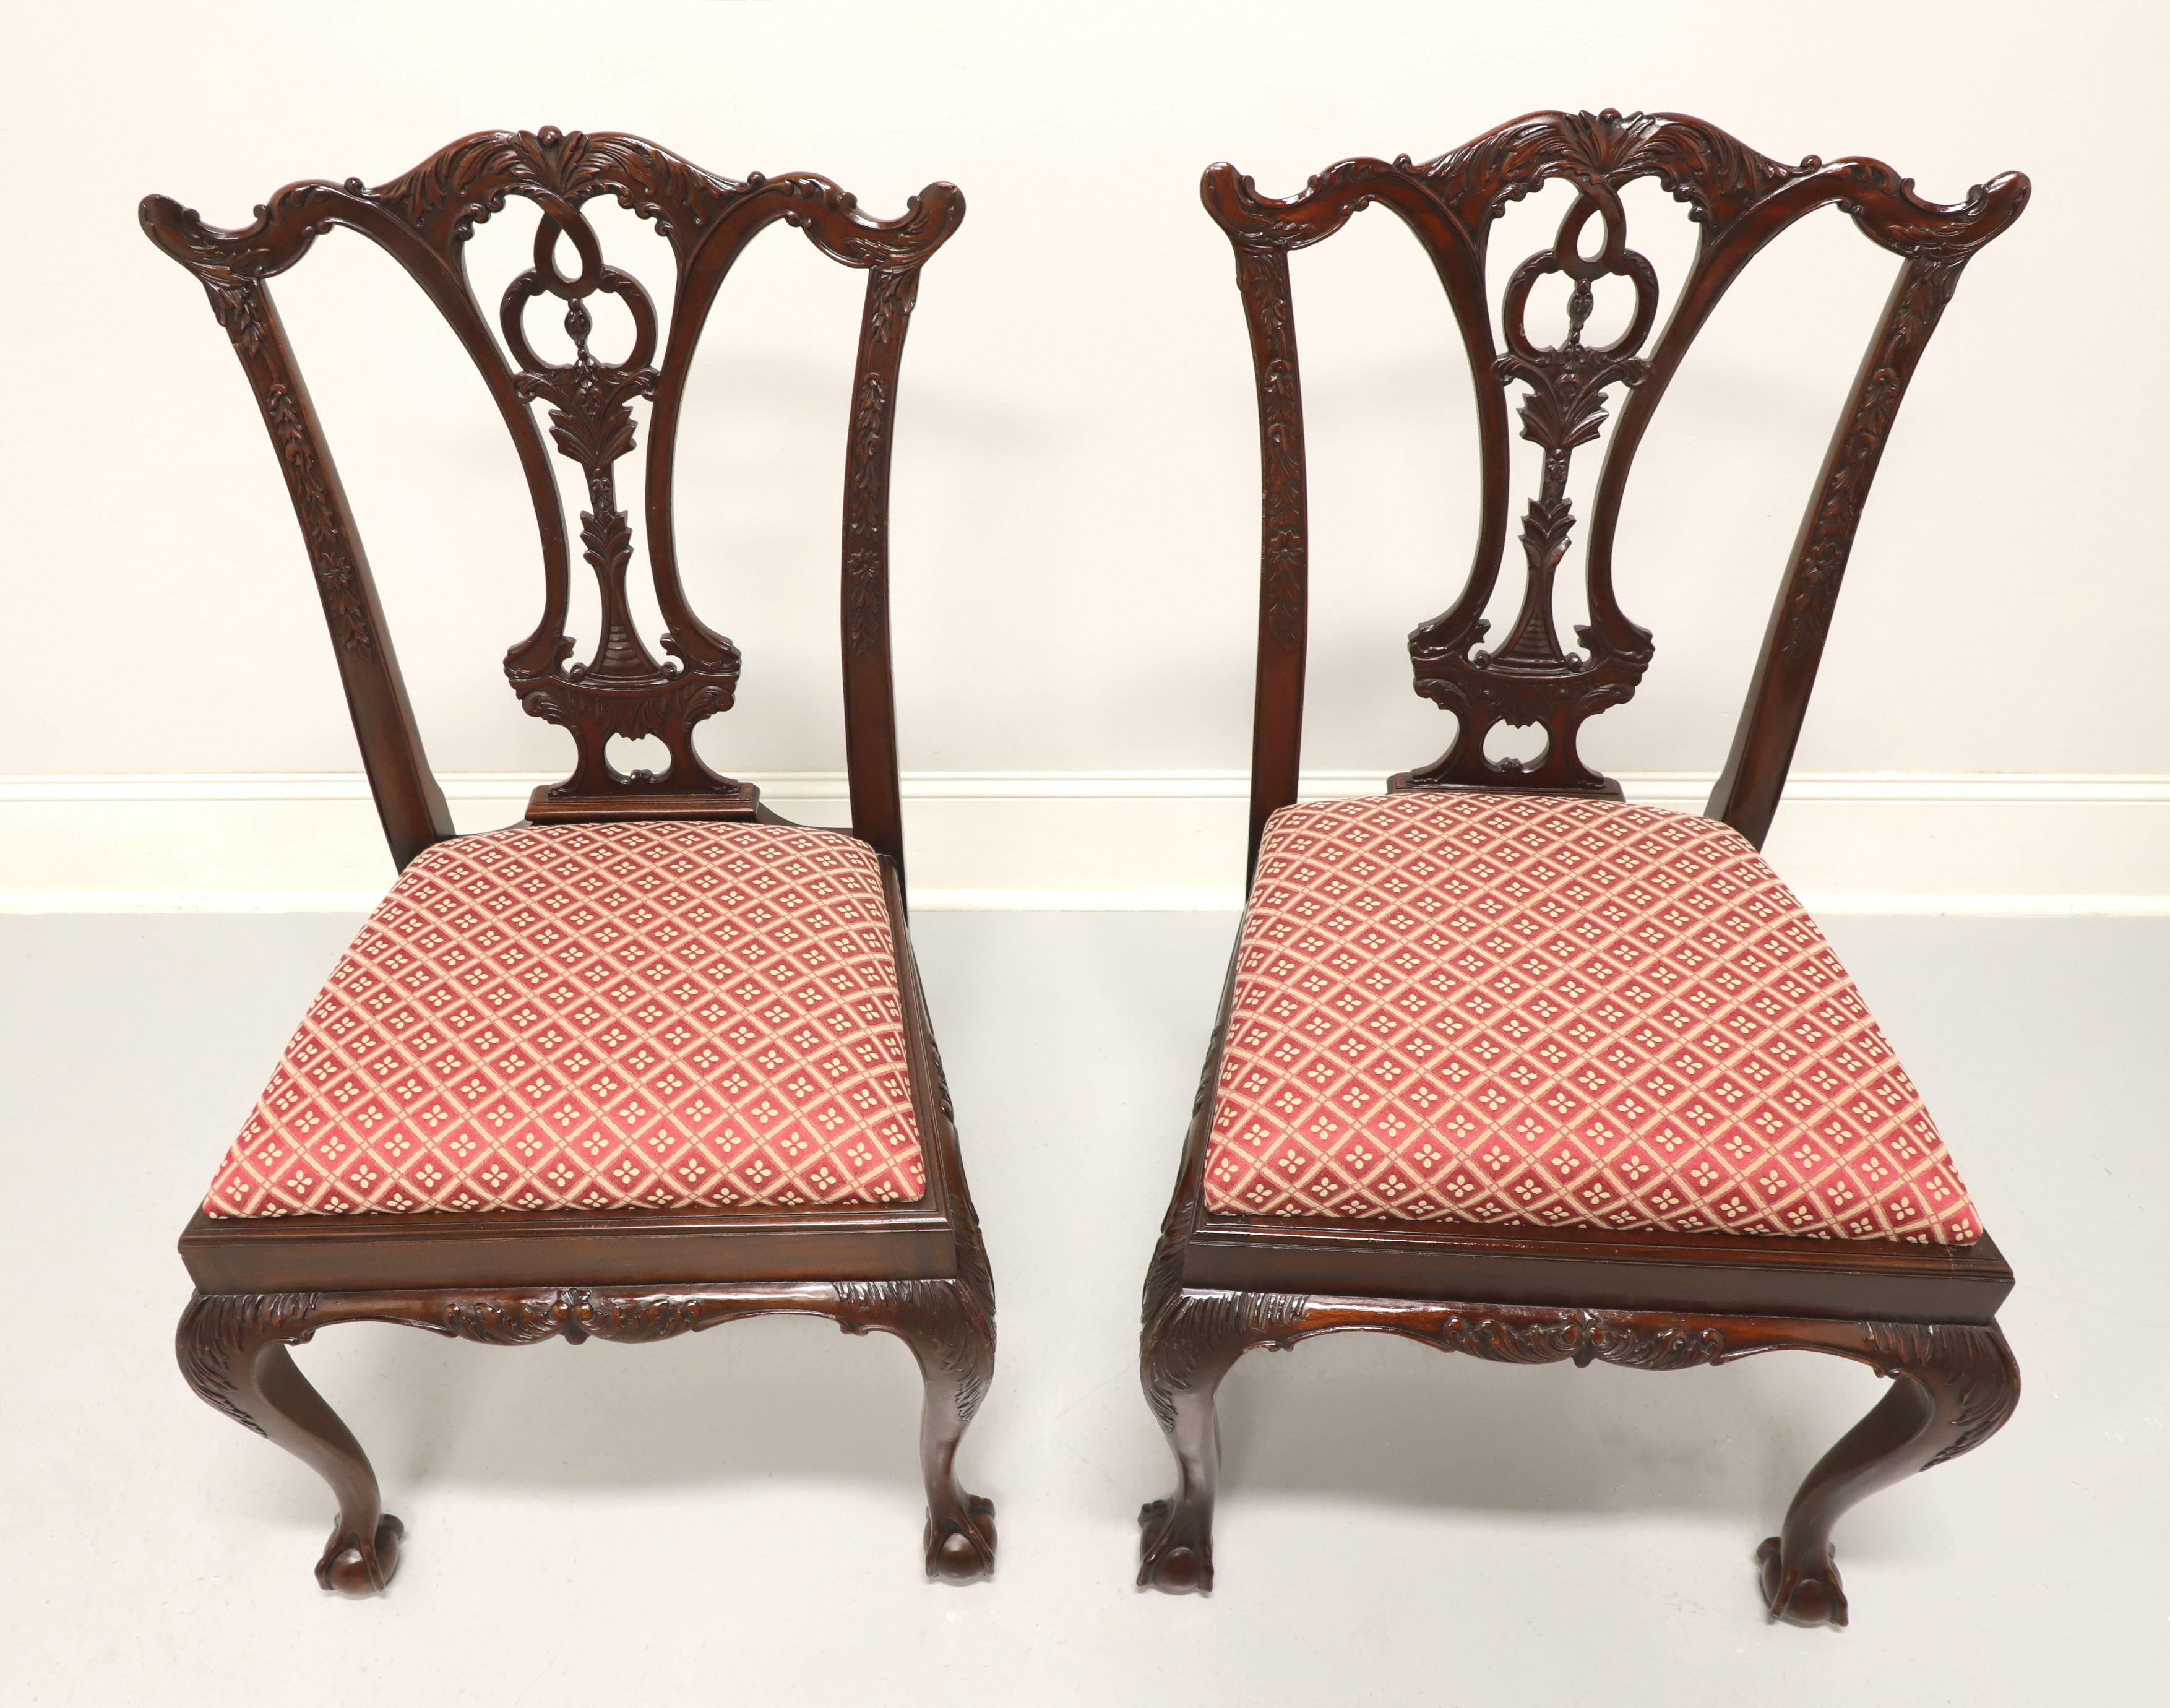 A pair of Chippendale style dining side chairs by Maitland Smith. Solid mahogany with carved crest rails, highly carved back rests, red & cream color diamond pattern fabric upholstered seats, carved apron, carved acanthus leaf to knees, curved legs